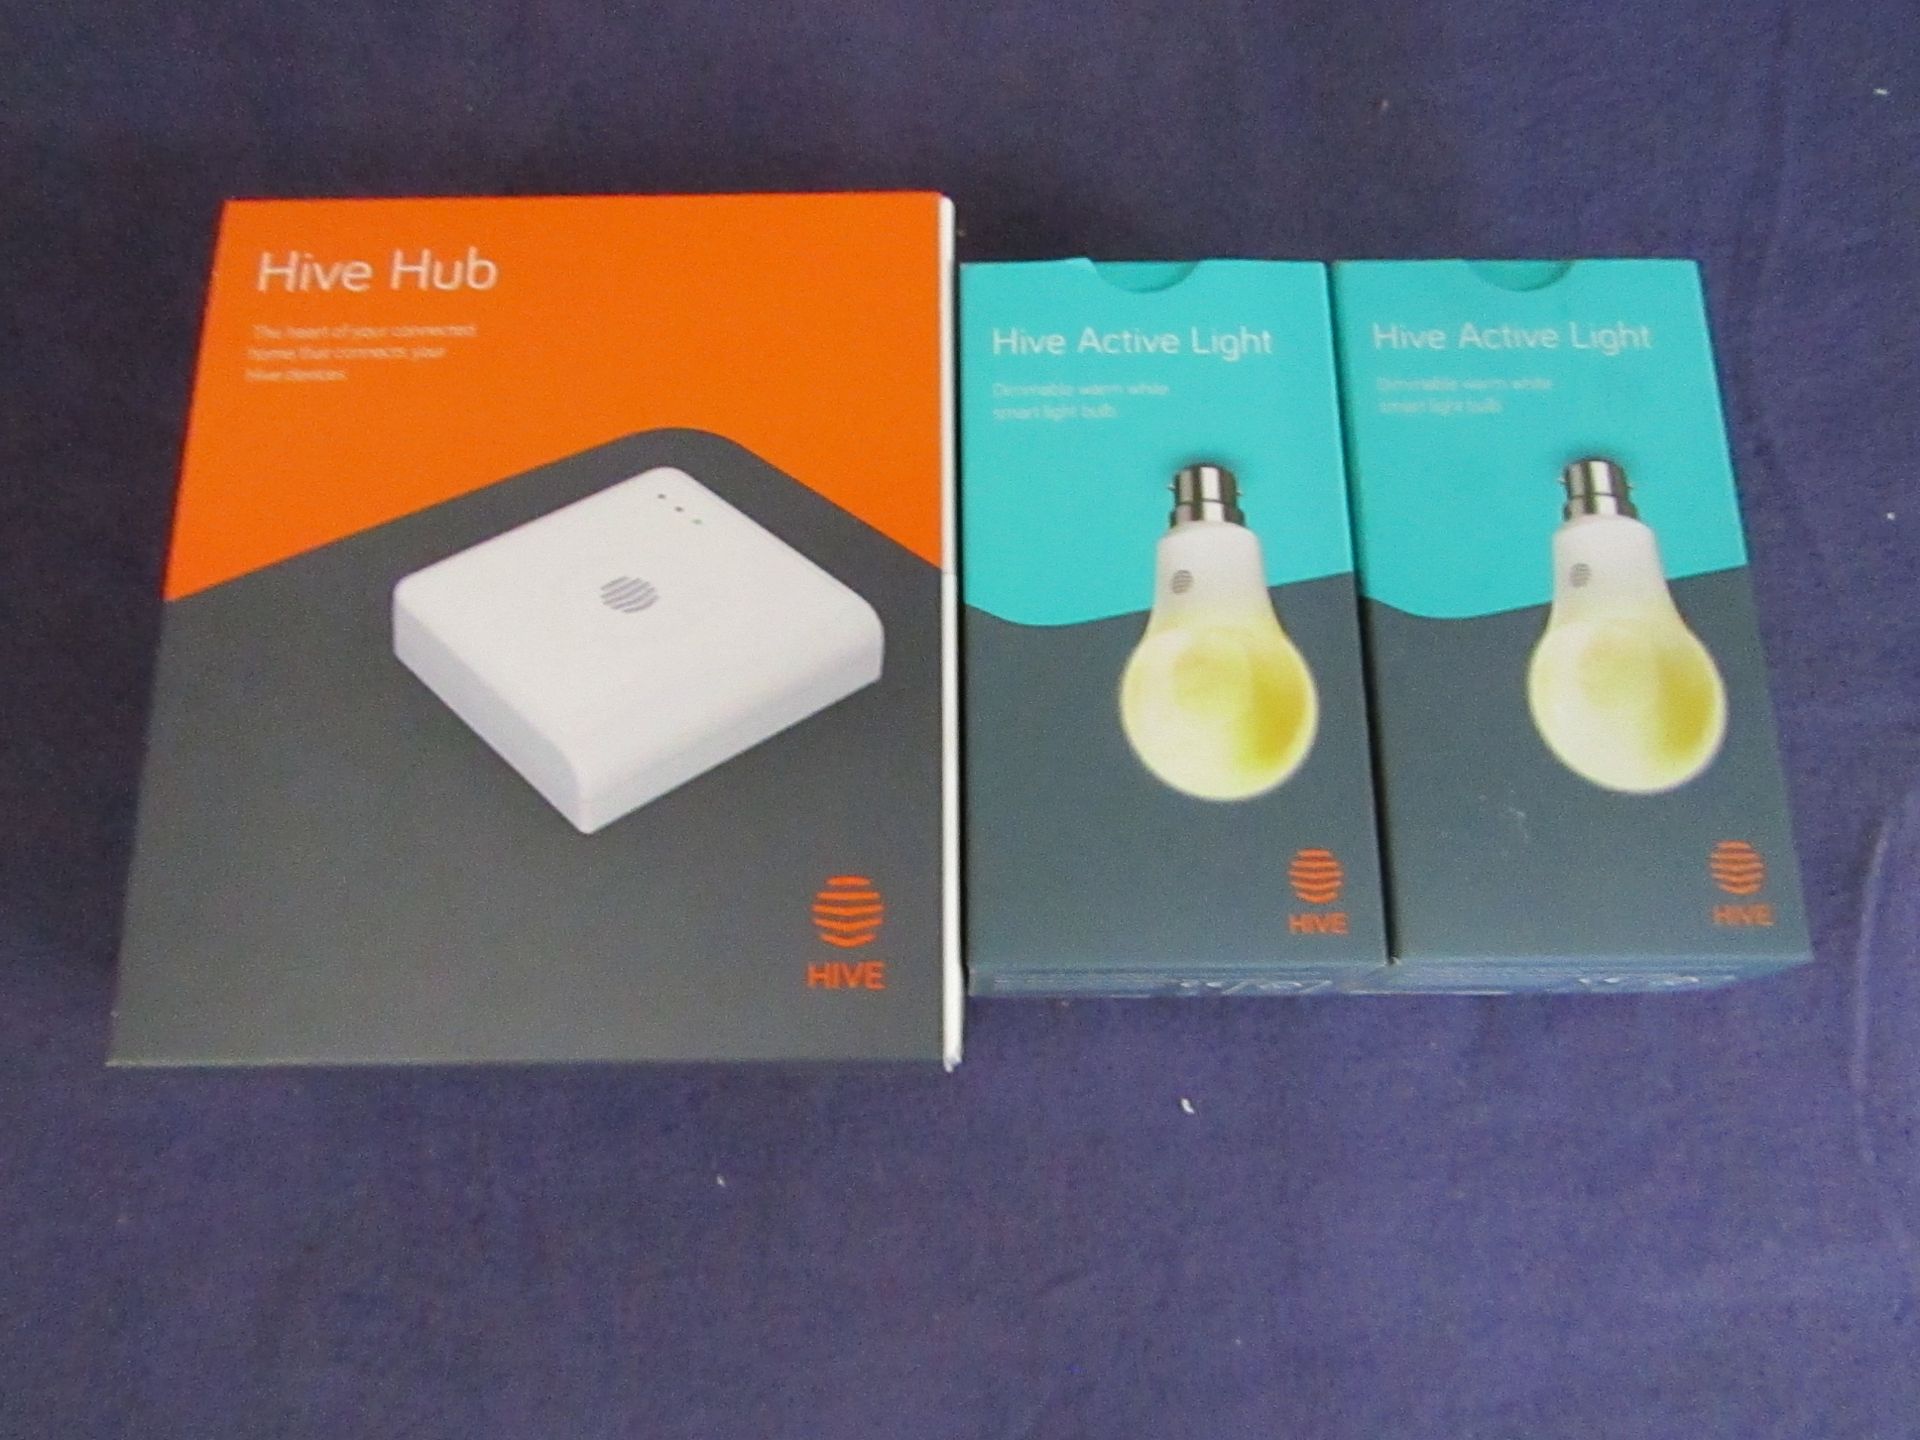 Hive Starter Kit - 1 Hive Hub and 2 x Hive Light E27 - Works with Amazon Alexa - Used Condition,